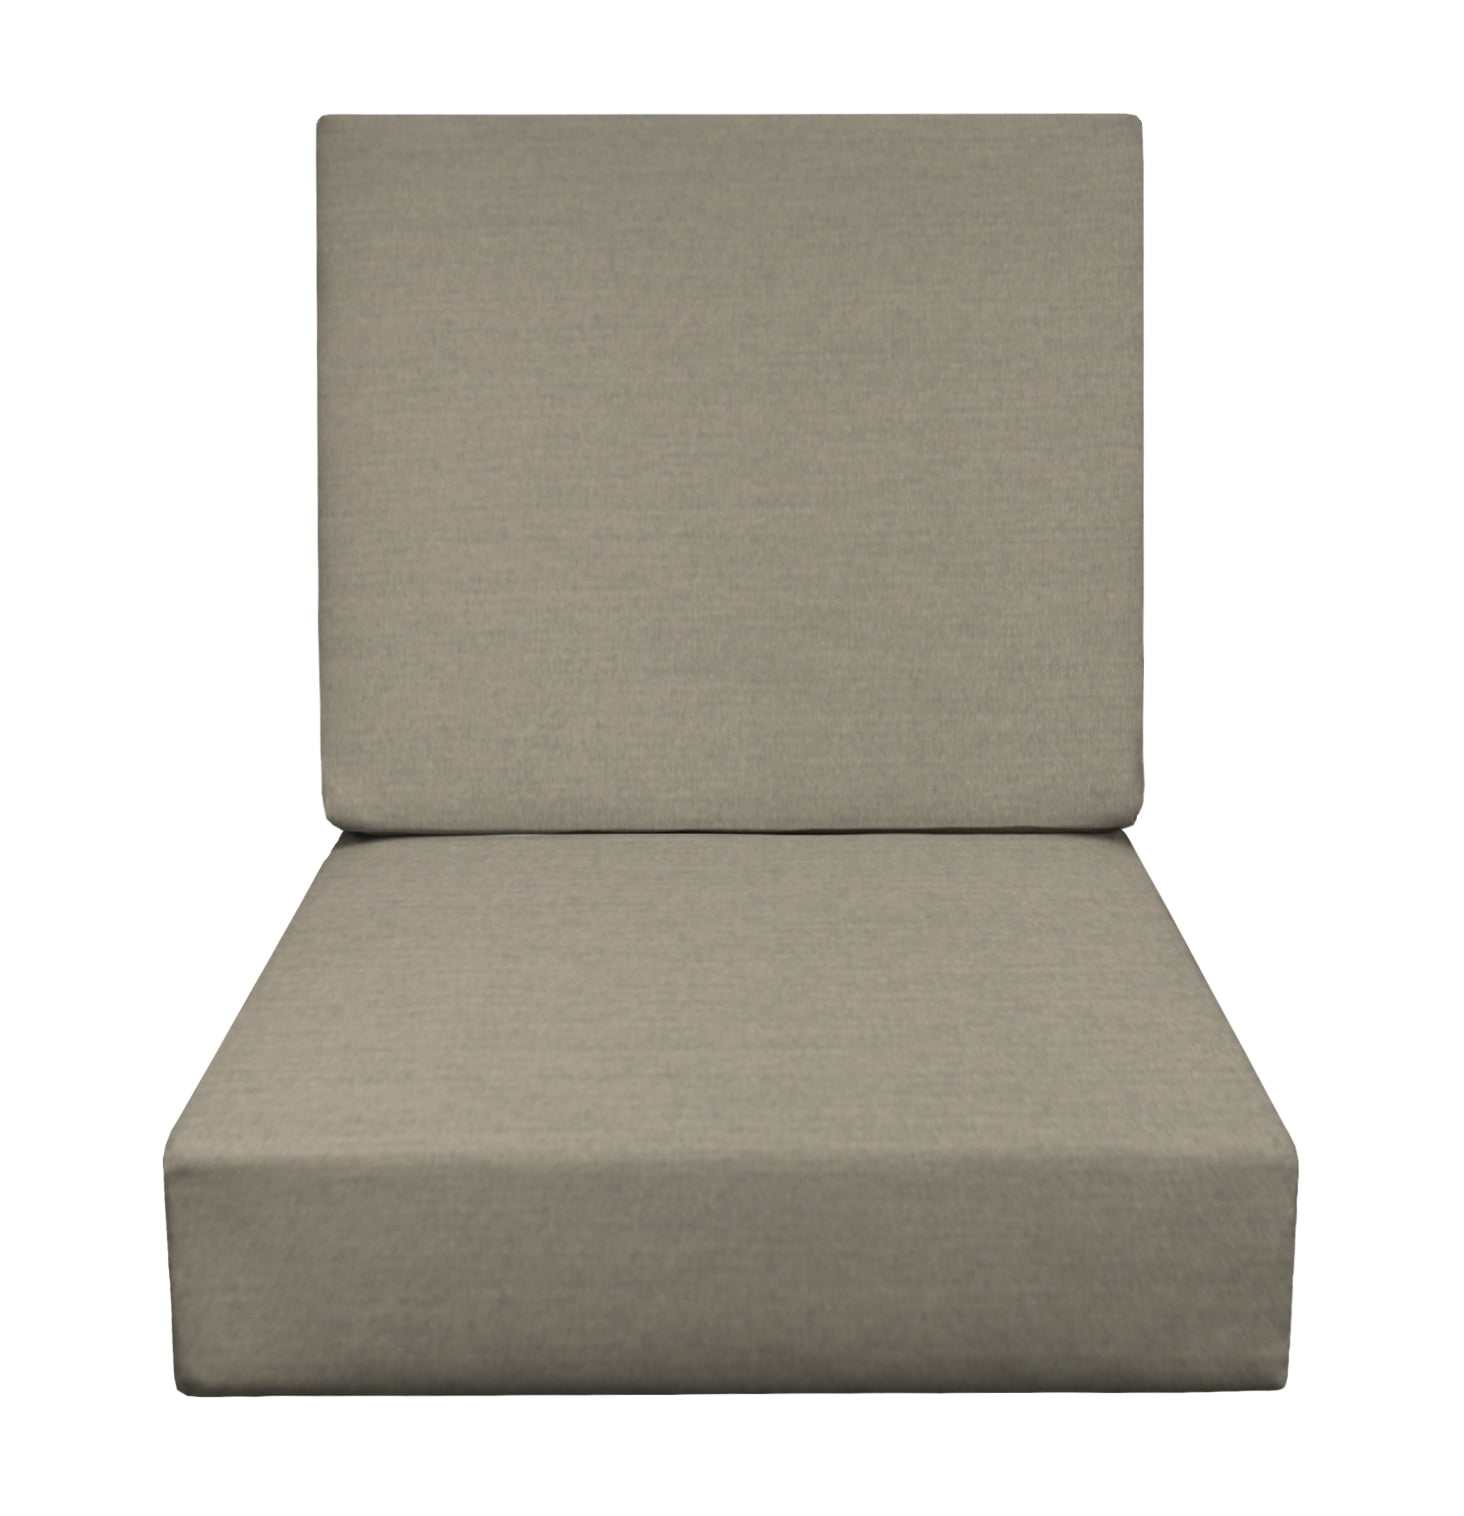 Details about   RSH Décor Indoor Outdoor Deep Seating Cushion Set 24”x 24”x5” and 25”x21"